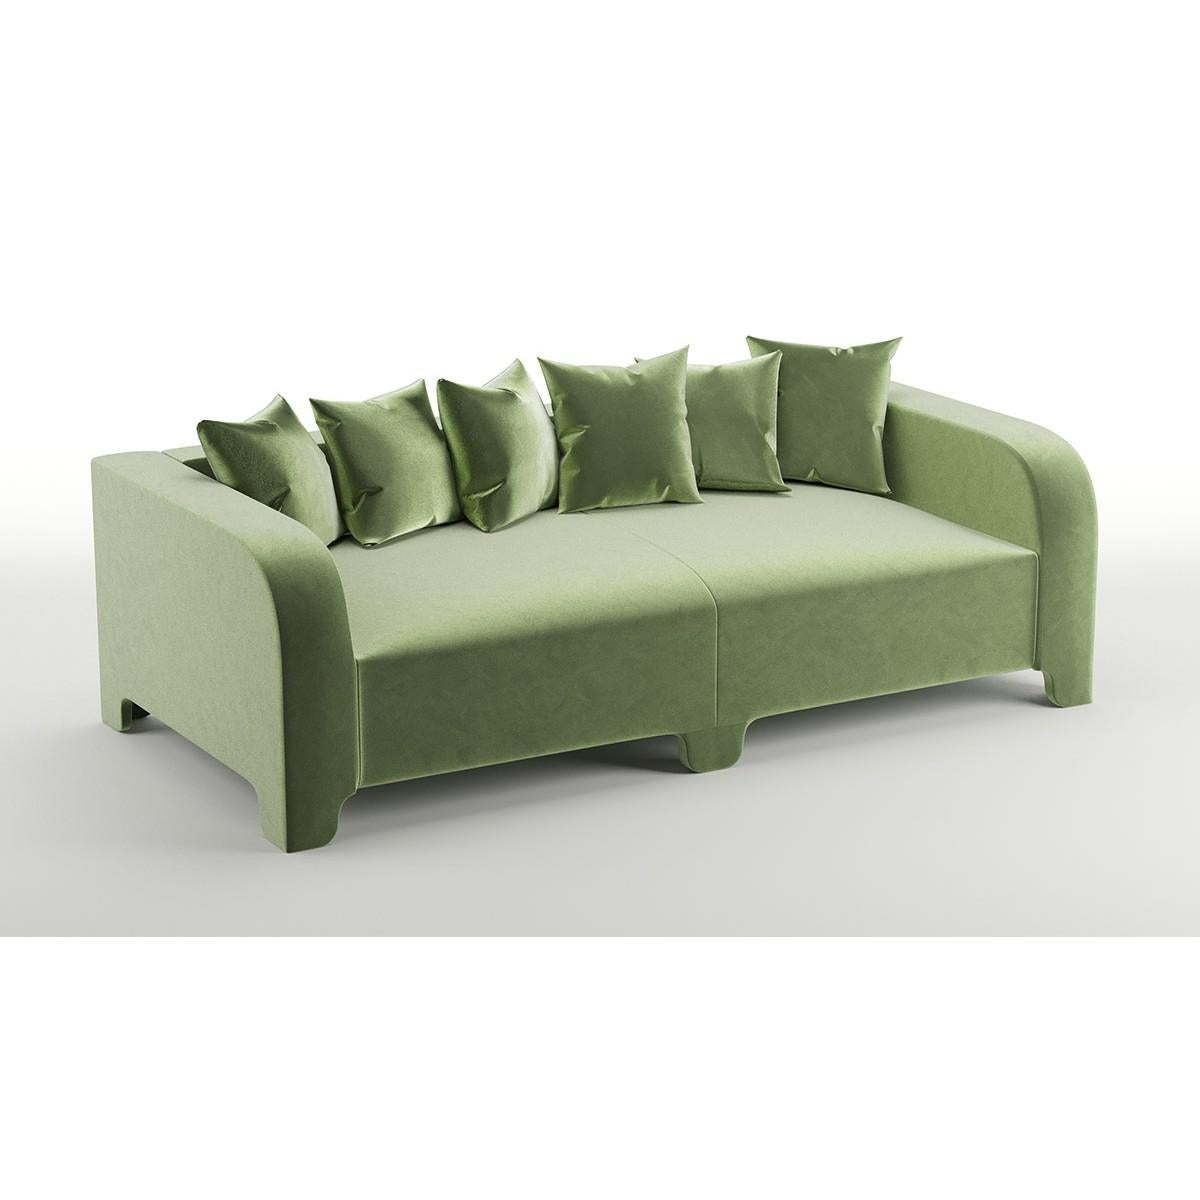 Popus Editions Graziella 3 Seater Sofa in Green Verone Velvet Upholstery For Sale